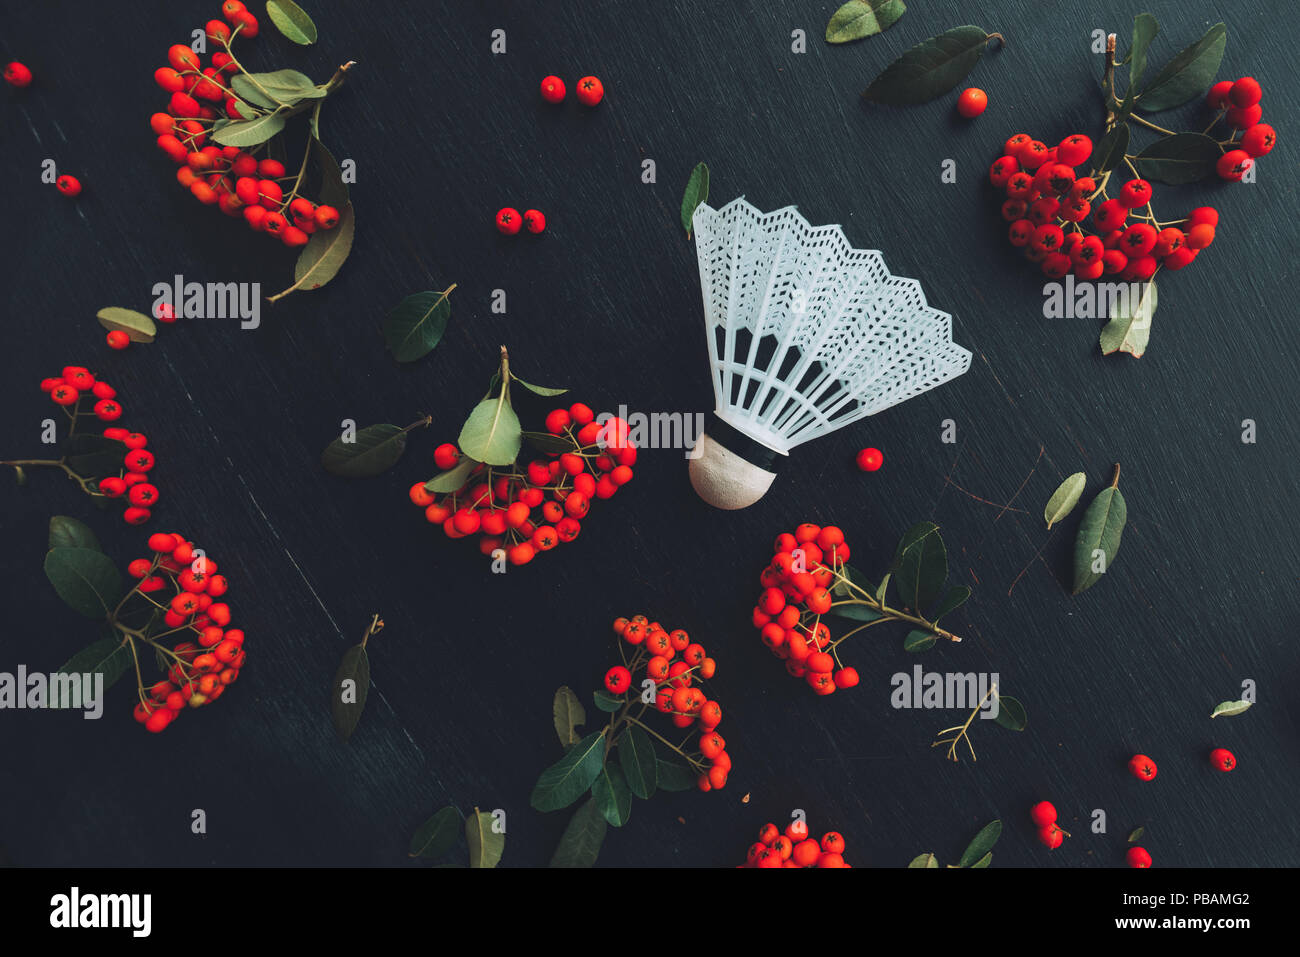 Flat lay badminton shuttlecock, top view of sports equipment with wild berry fruit arrangement Stock Photo